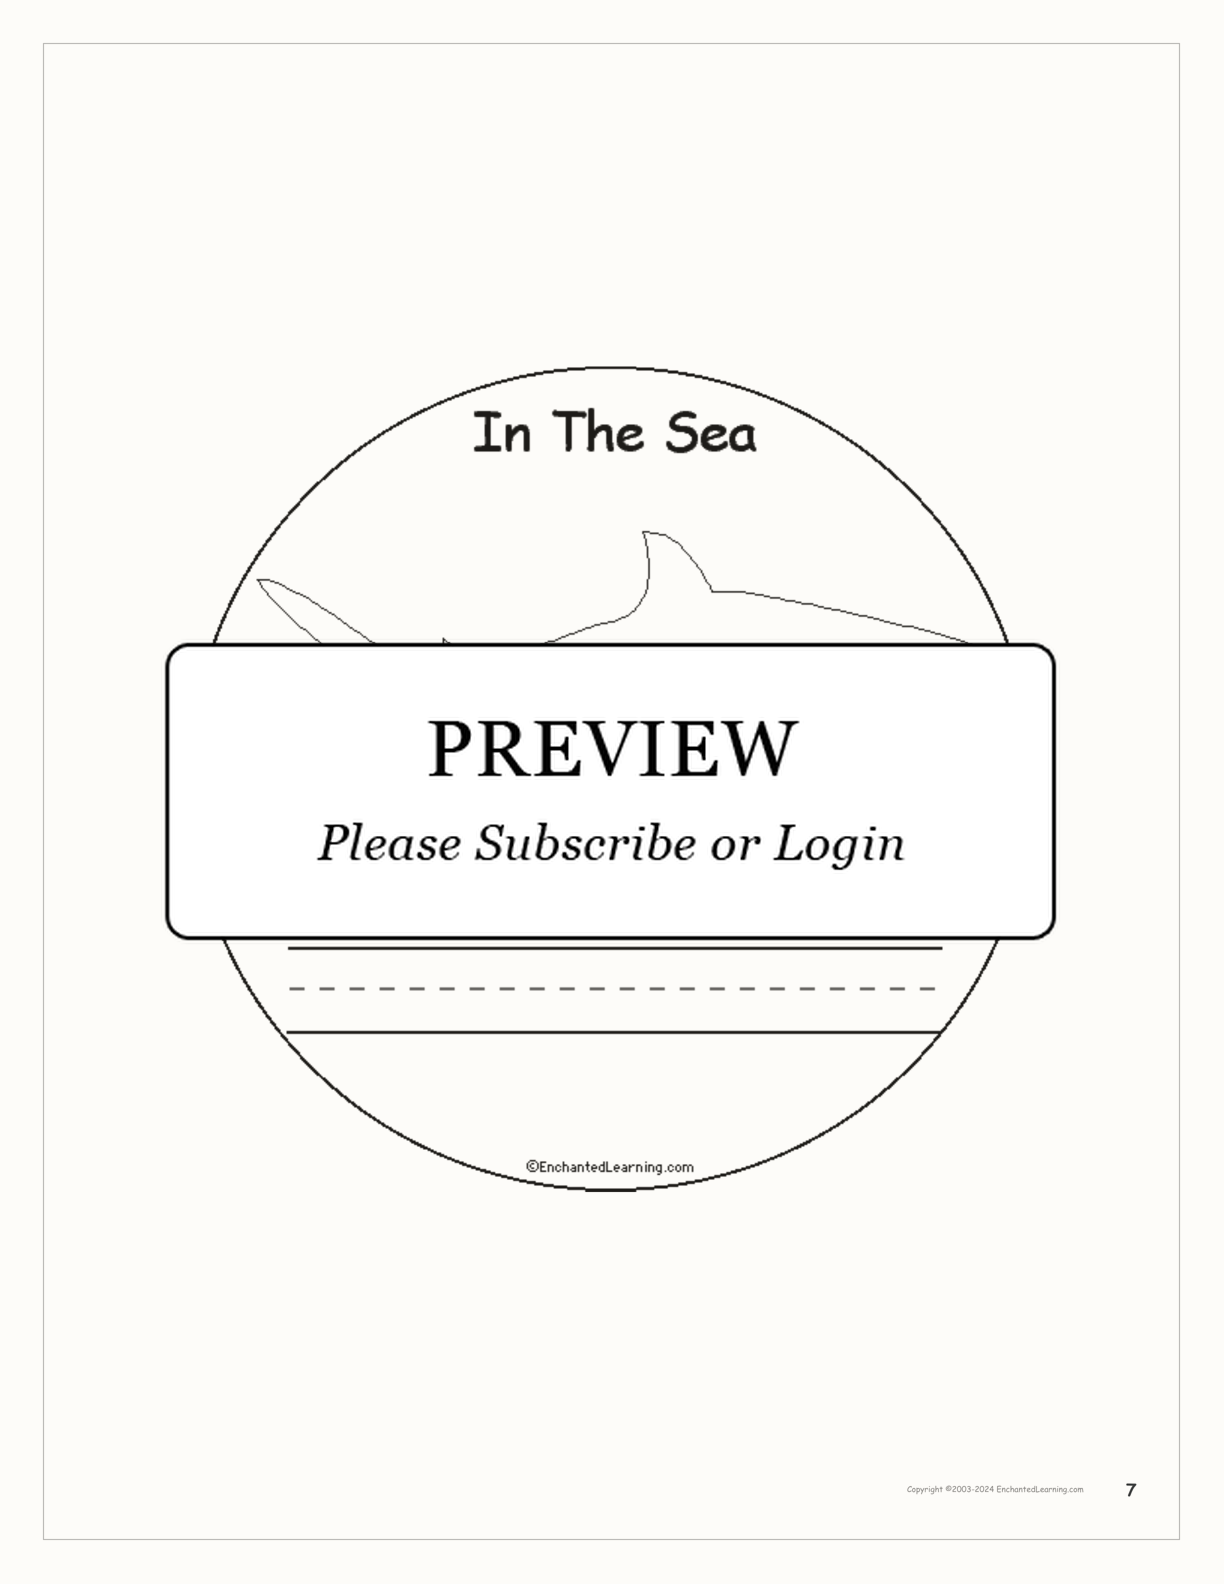 In The Sea: Early Reader Book interactive printout page 7